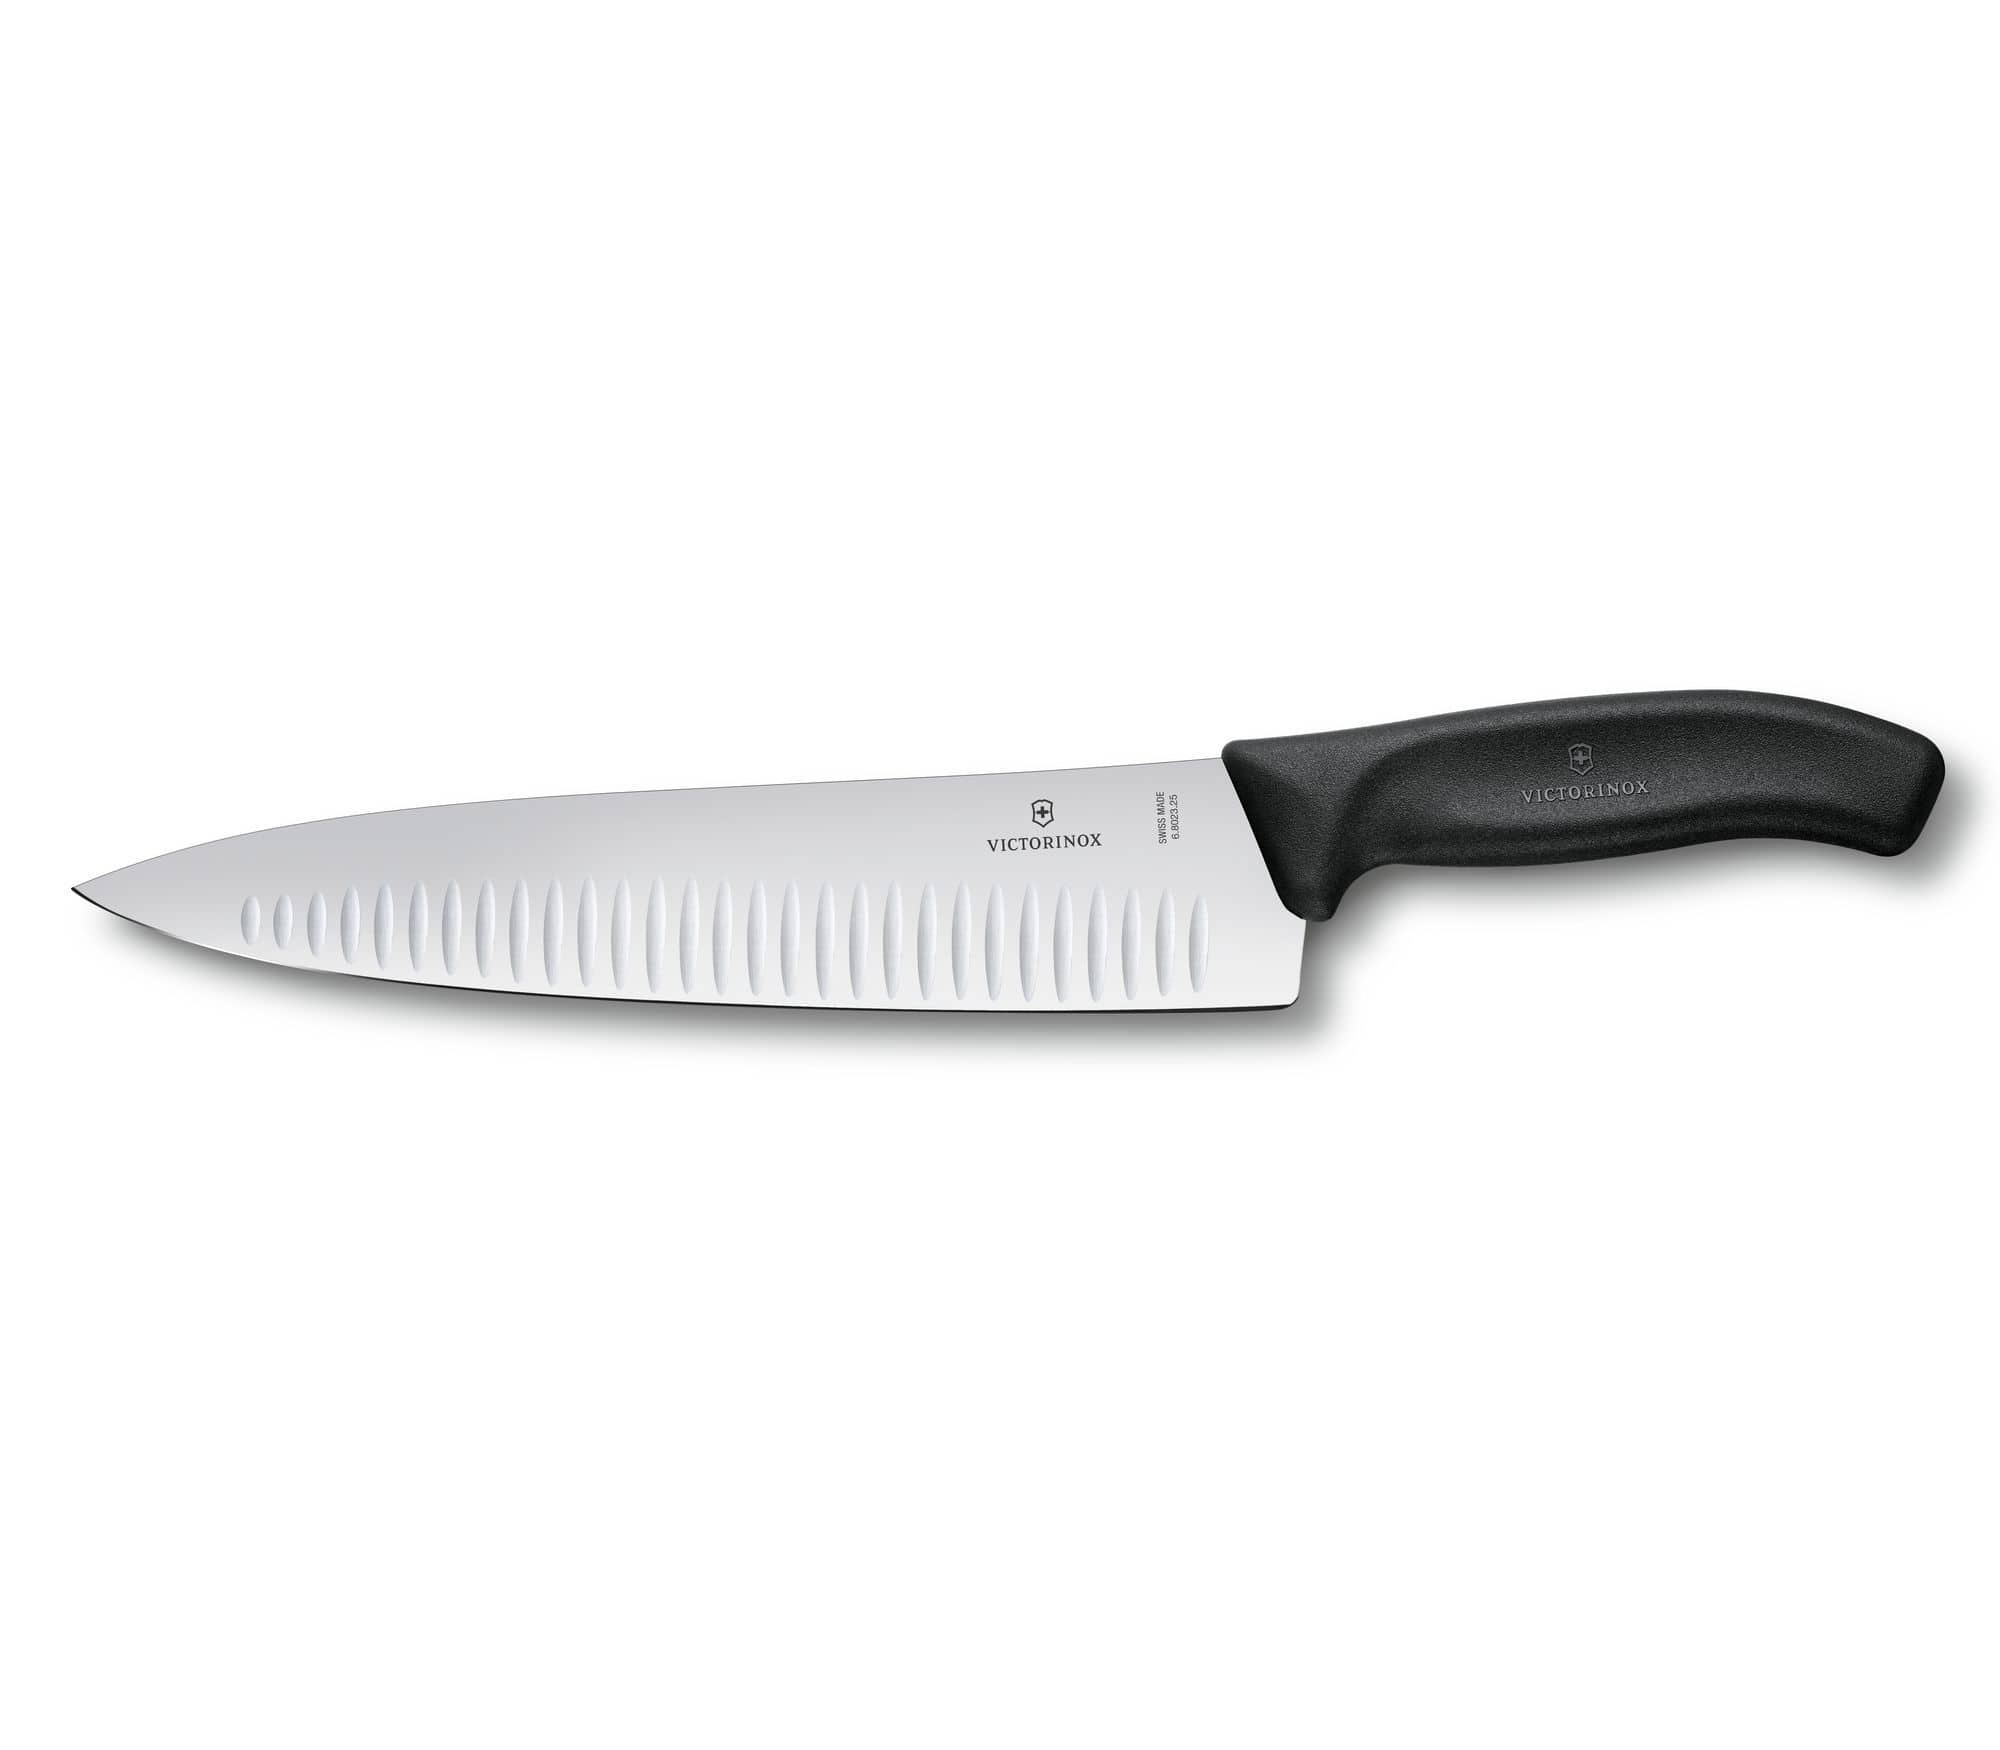 VICTORINOX CARVING KNIFE FLUTED EDGE 25CM - 6.8023.25G